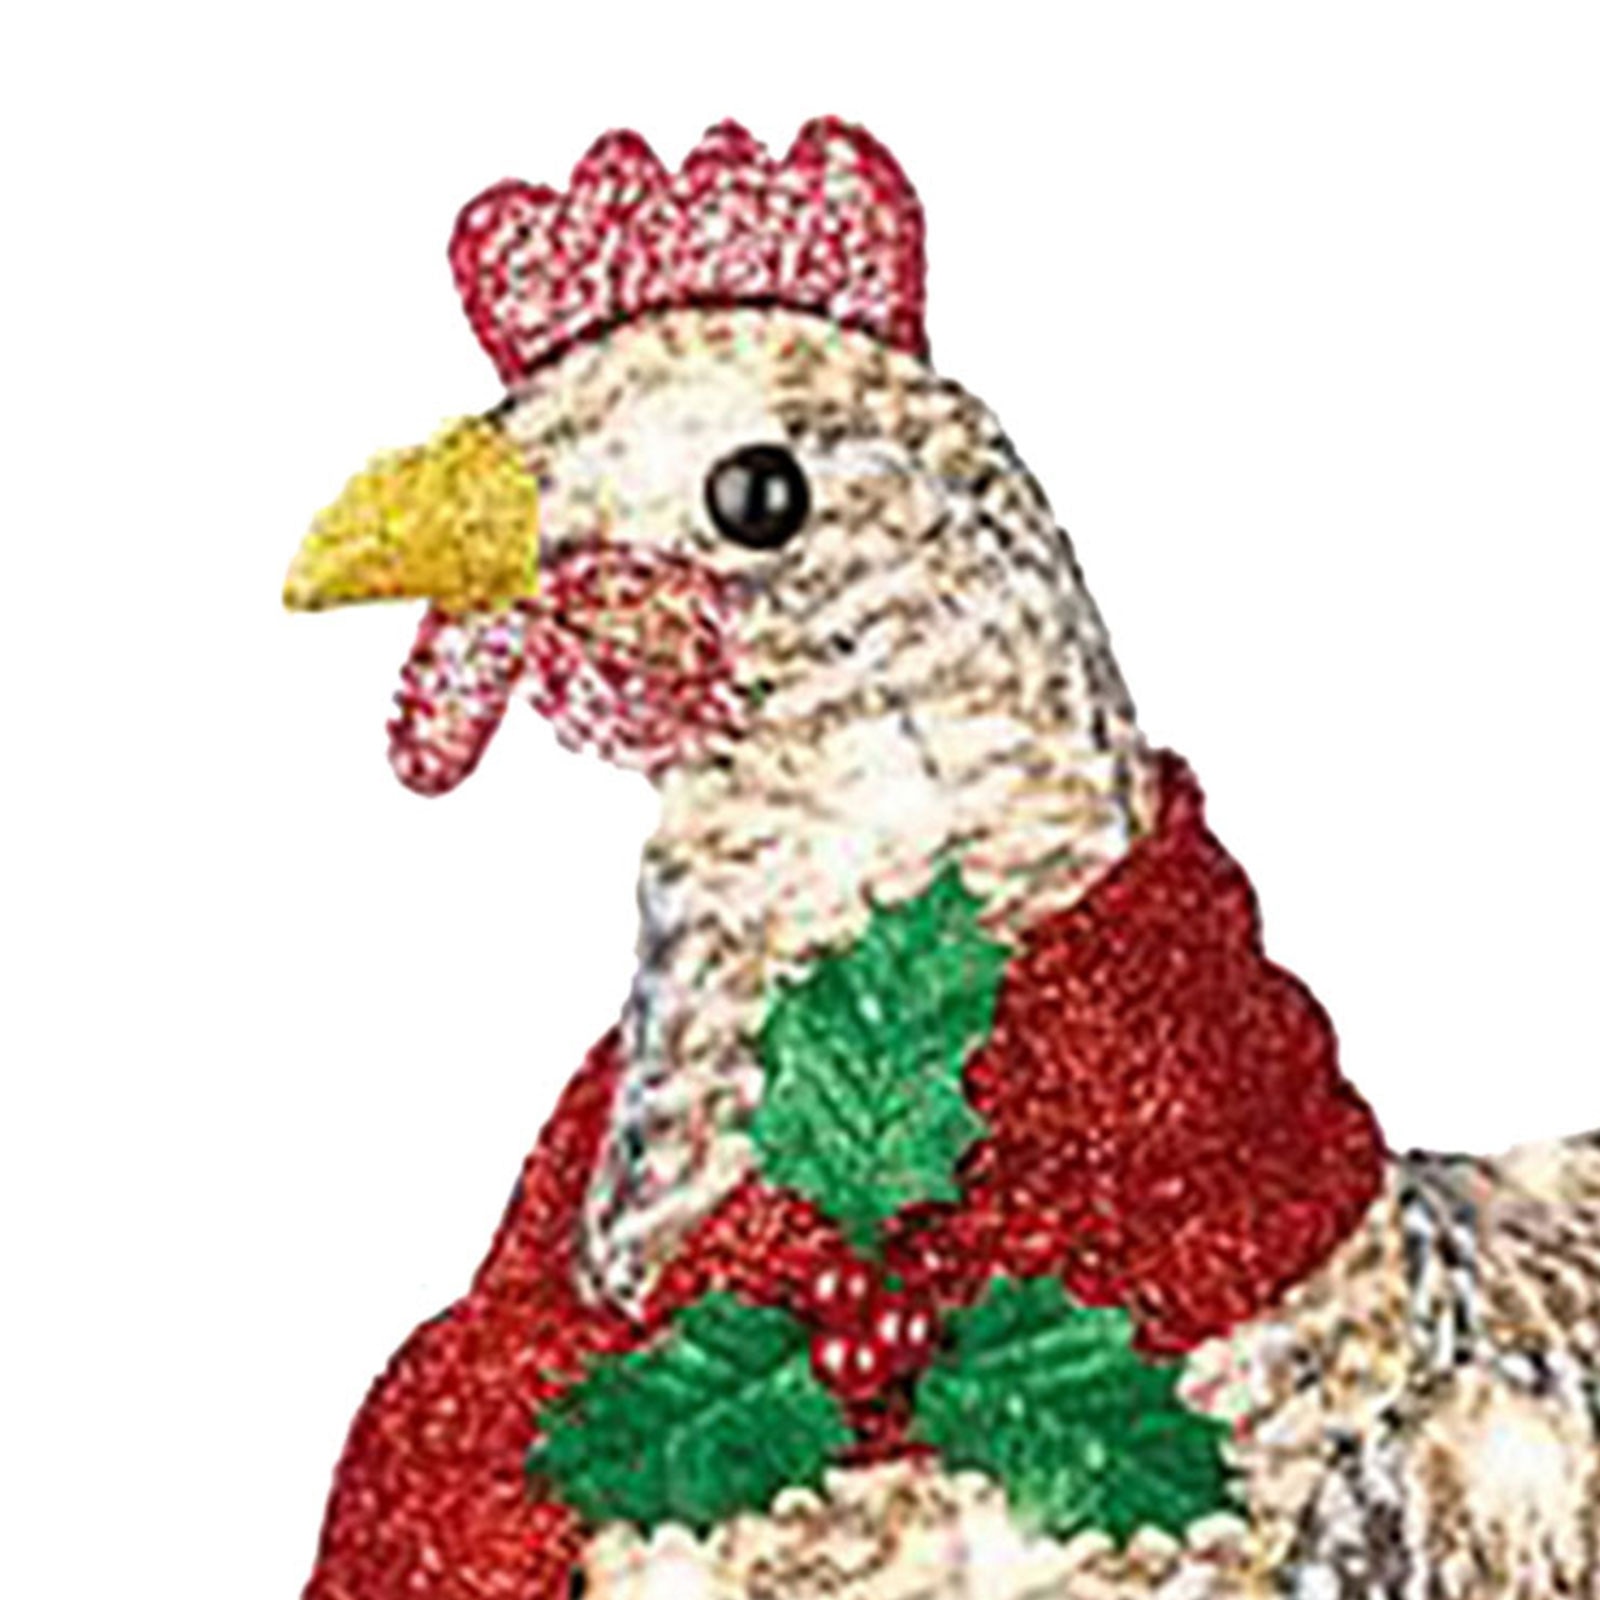 Christmas Light-Up Chicken with Scarf Holiday Decoration Light Yard Garden Xmas Atmosphere Ornaments Outdoor Garden Decoration